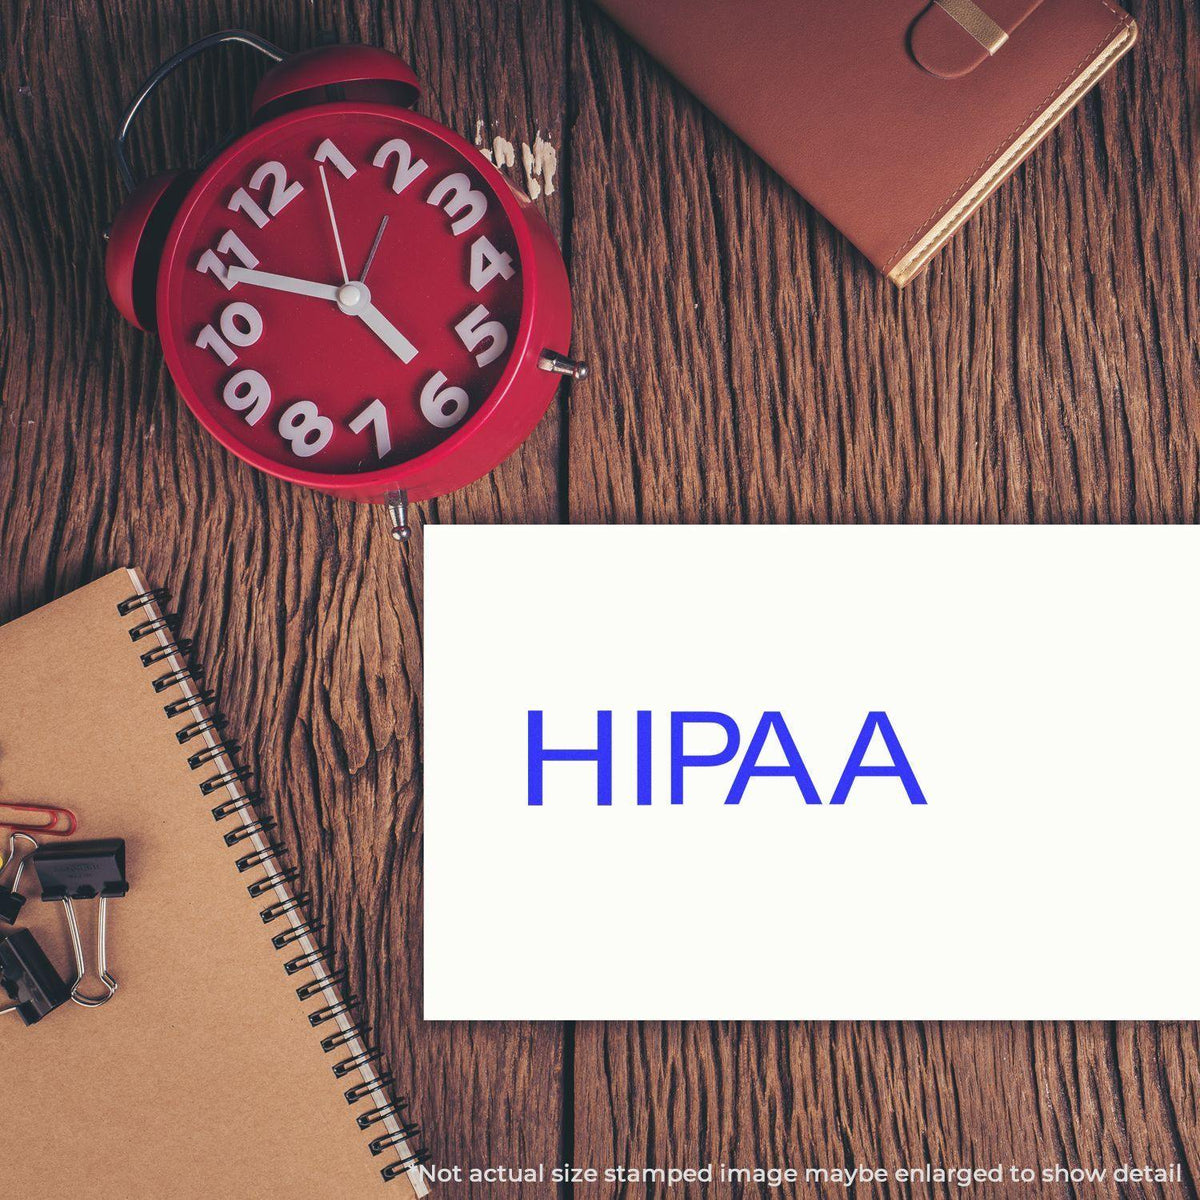 In Use Hippa Medical Rubber Stamp Image